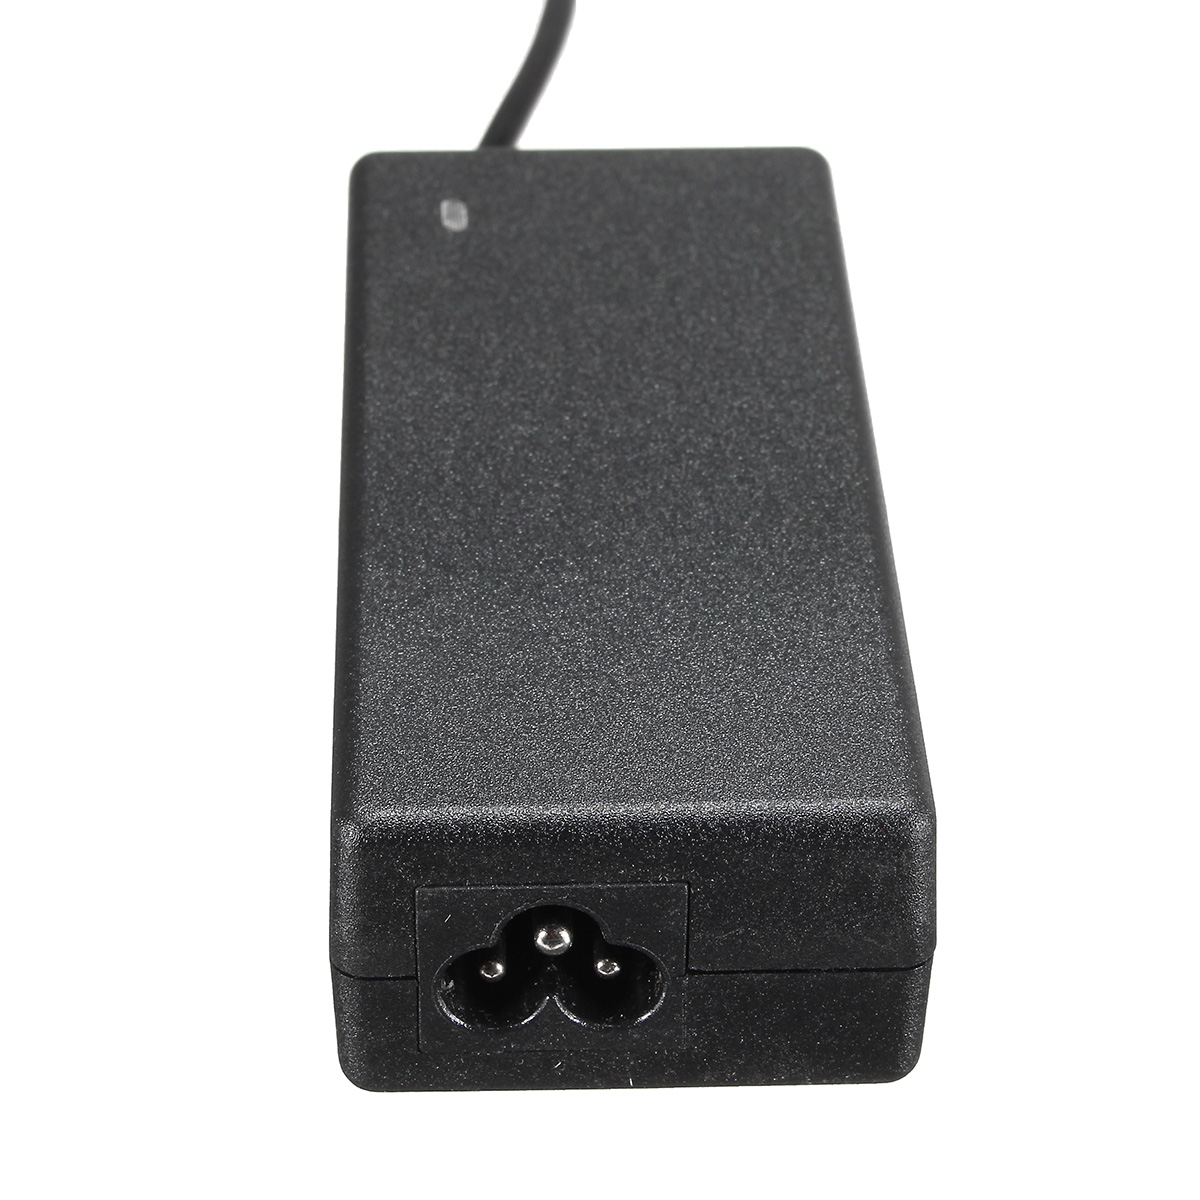 65W-Replacement-AC-Adapter-For-HP-Pavilion-G4-G5-G6-G7-Notebook-1201182-5